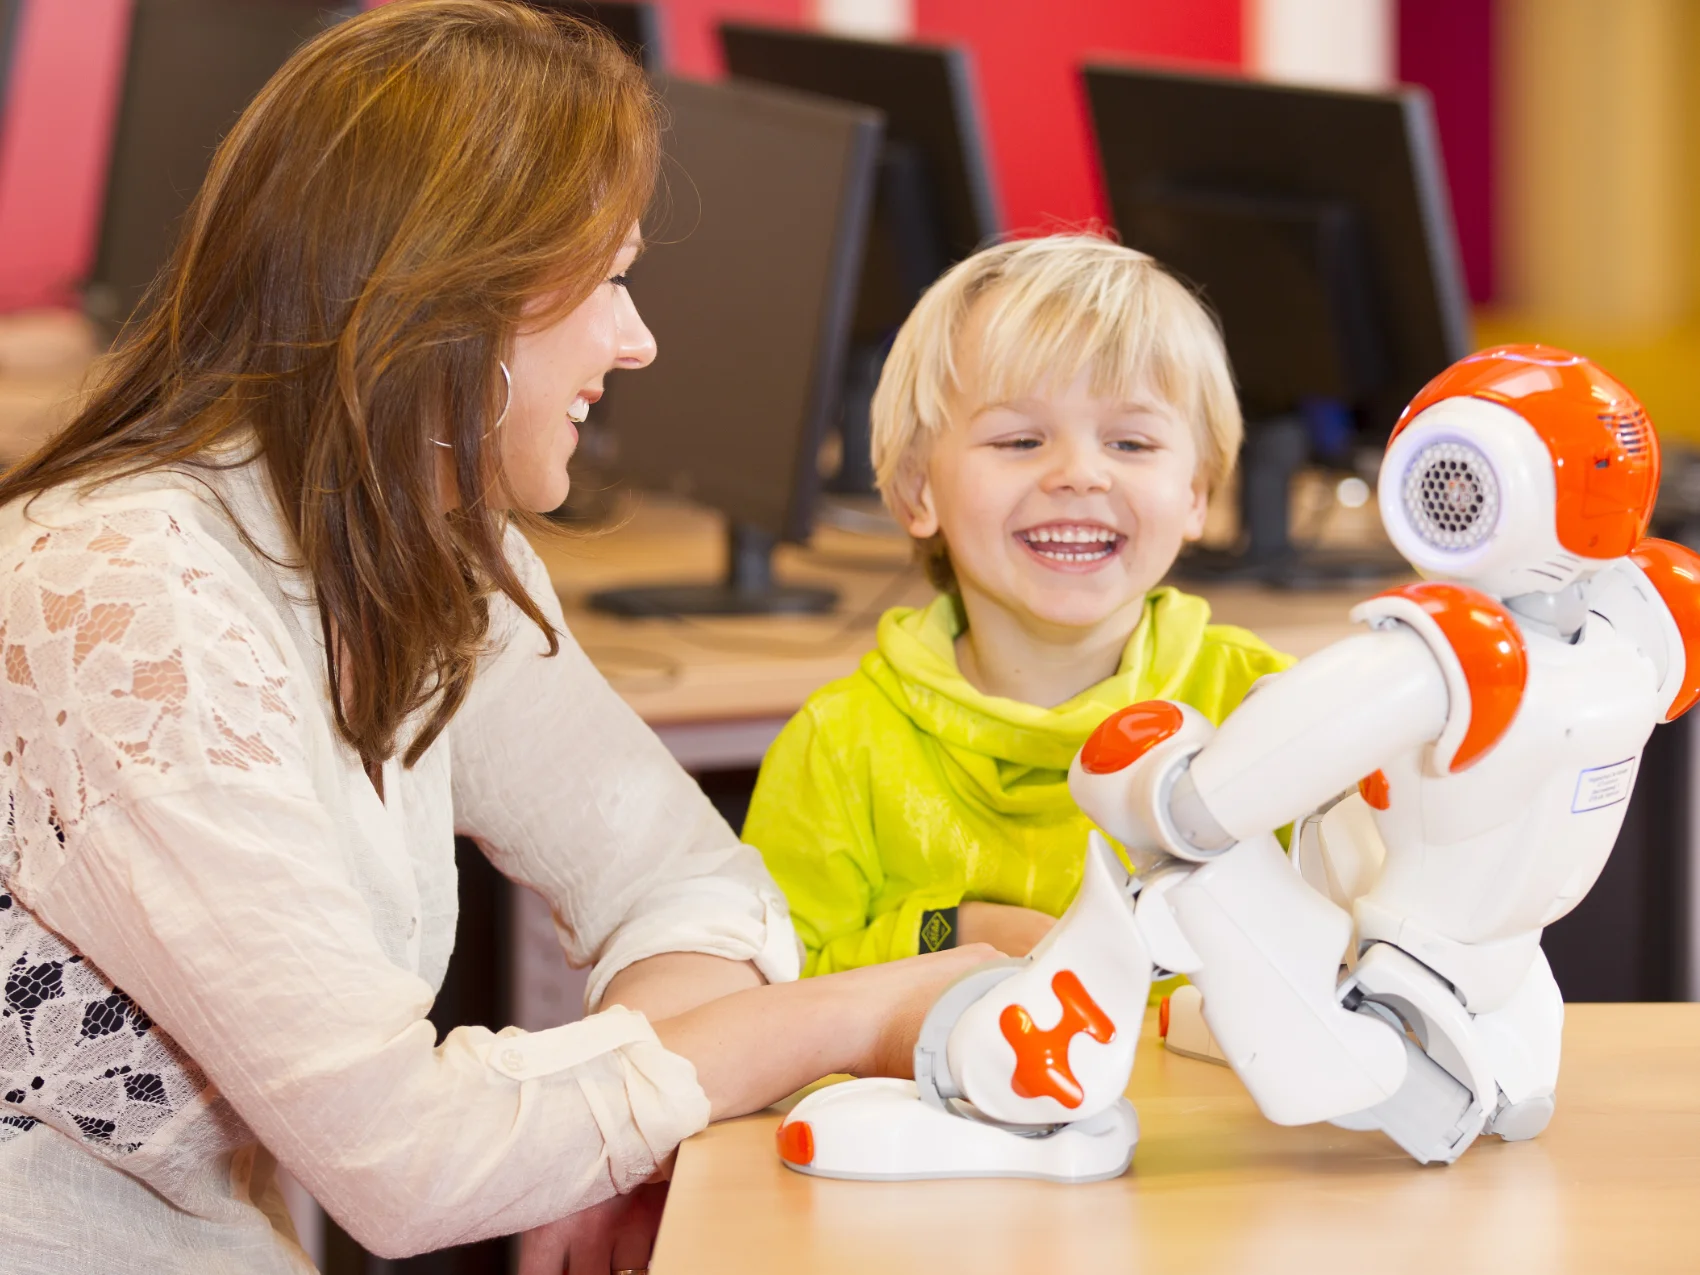 A woman and a young child play with a toy robot in a classroom